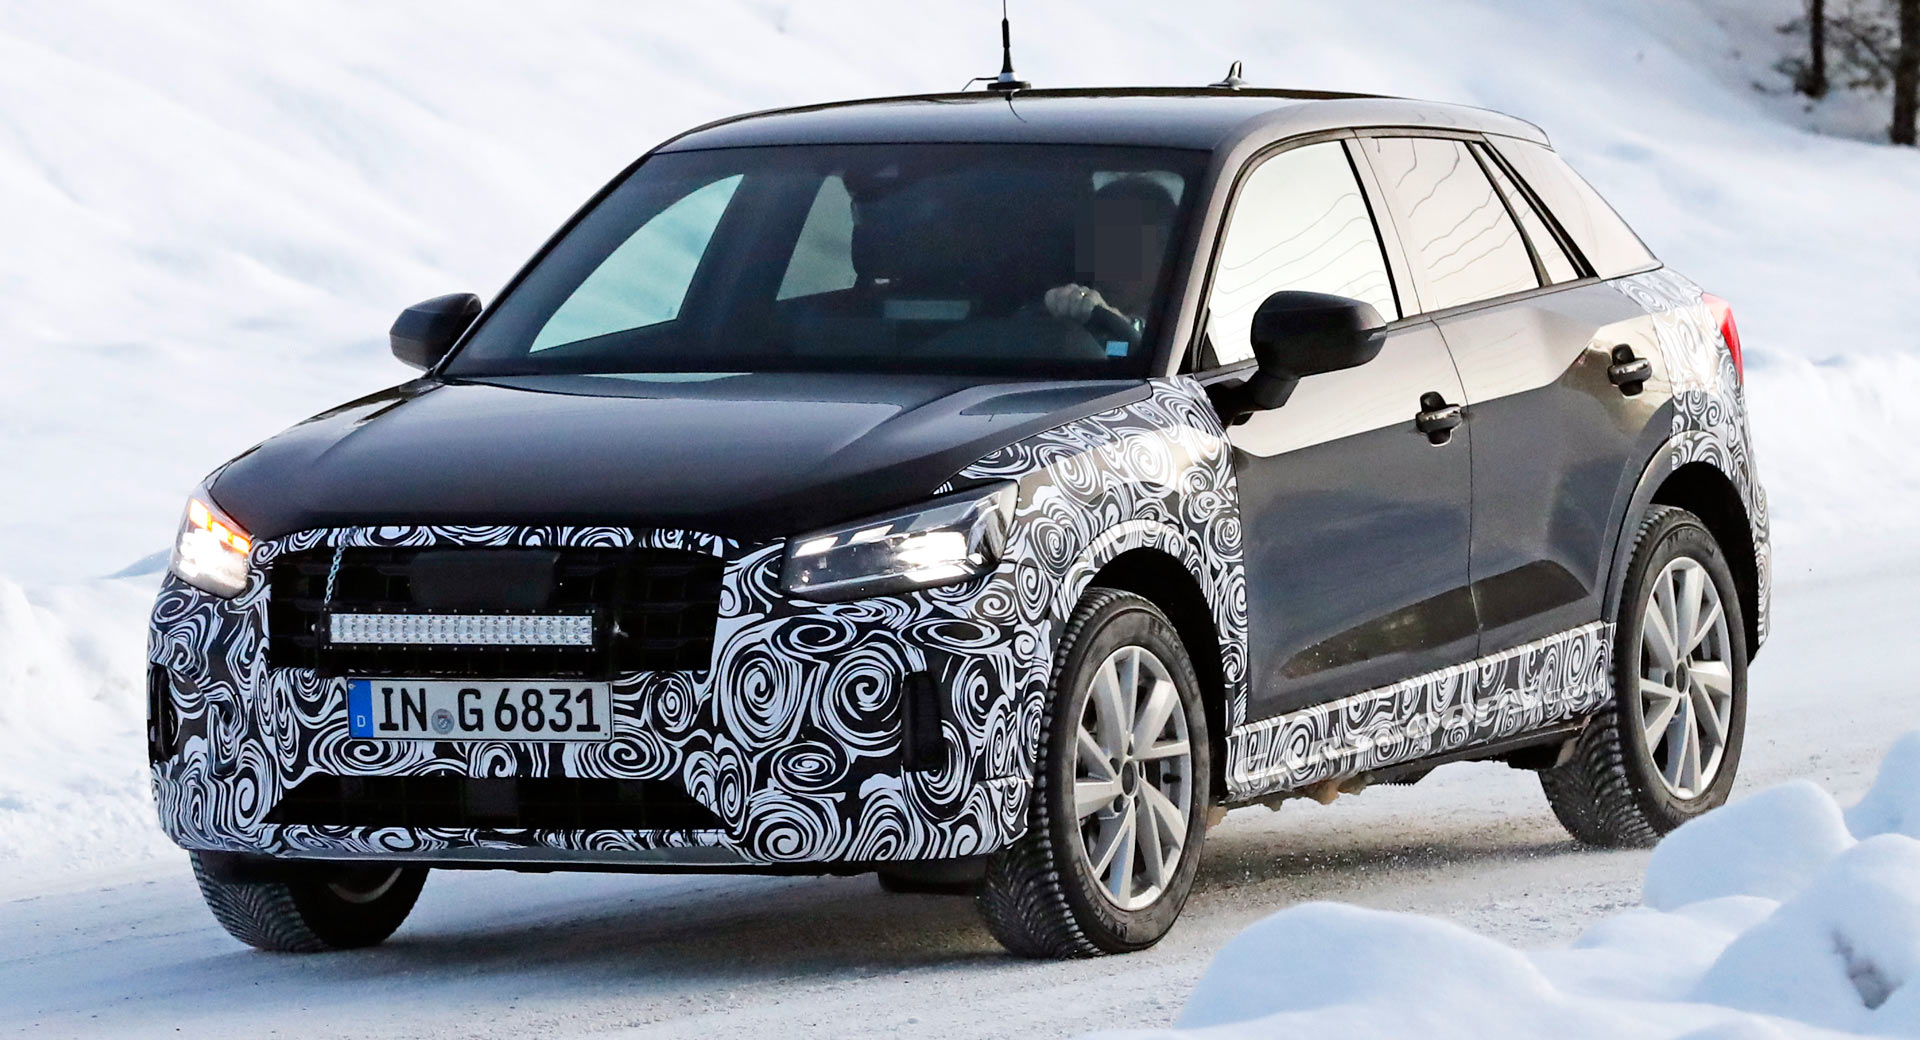 Facelifted Audi Q2 Looks Like A Cute Snow Bunny In Sweden Carscoops